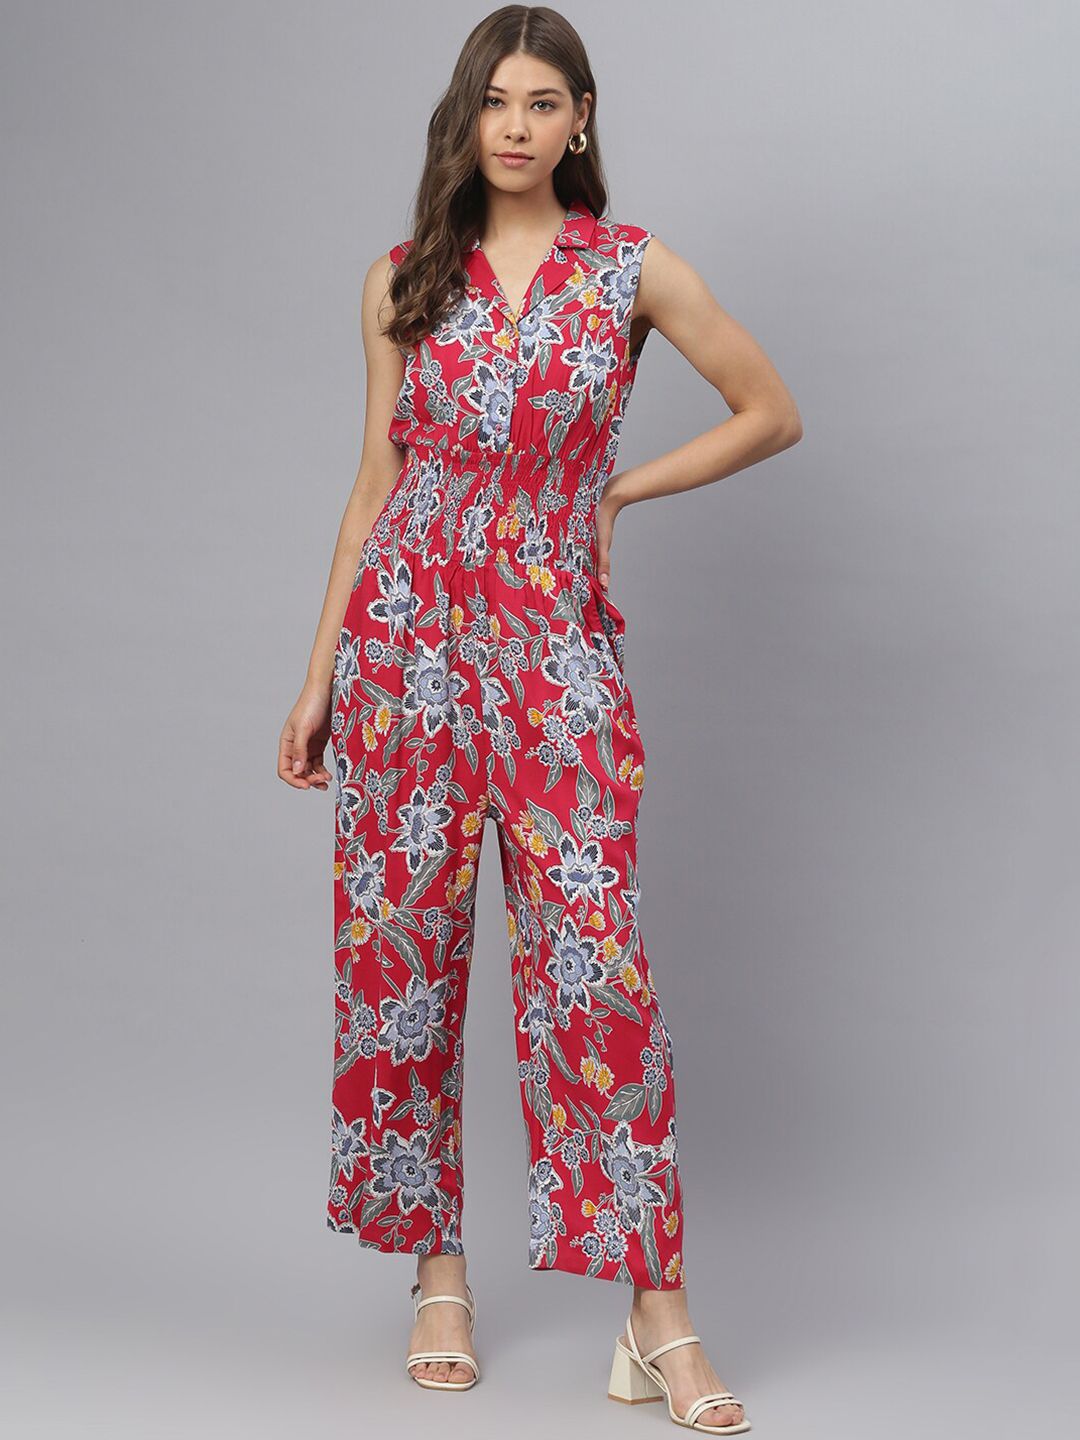 DEEBACO Red & Yellow Printed Cotton Basic Jumpsuit Price in India